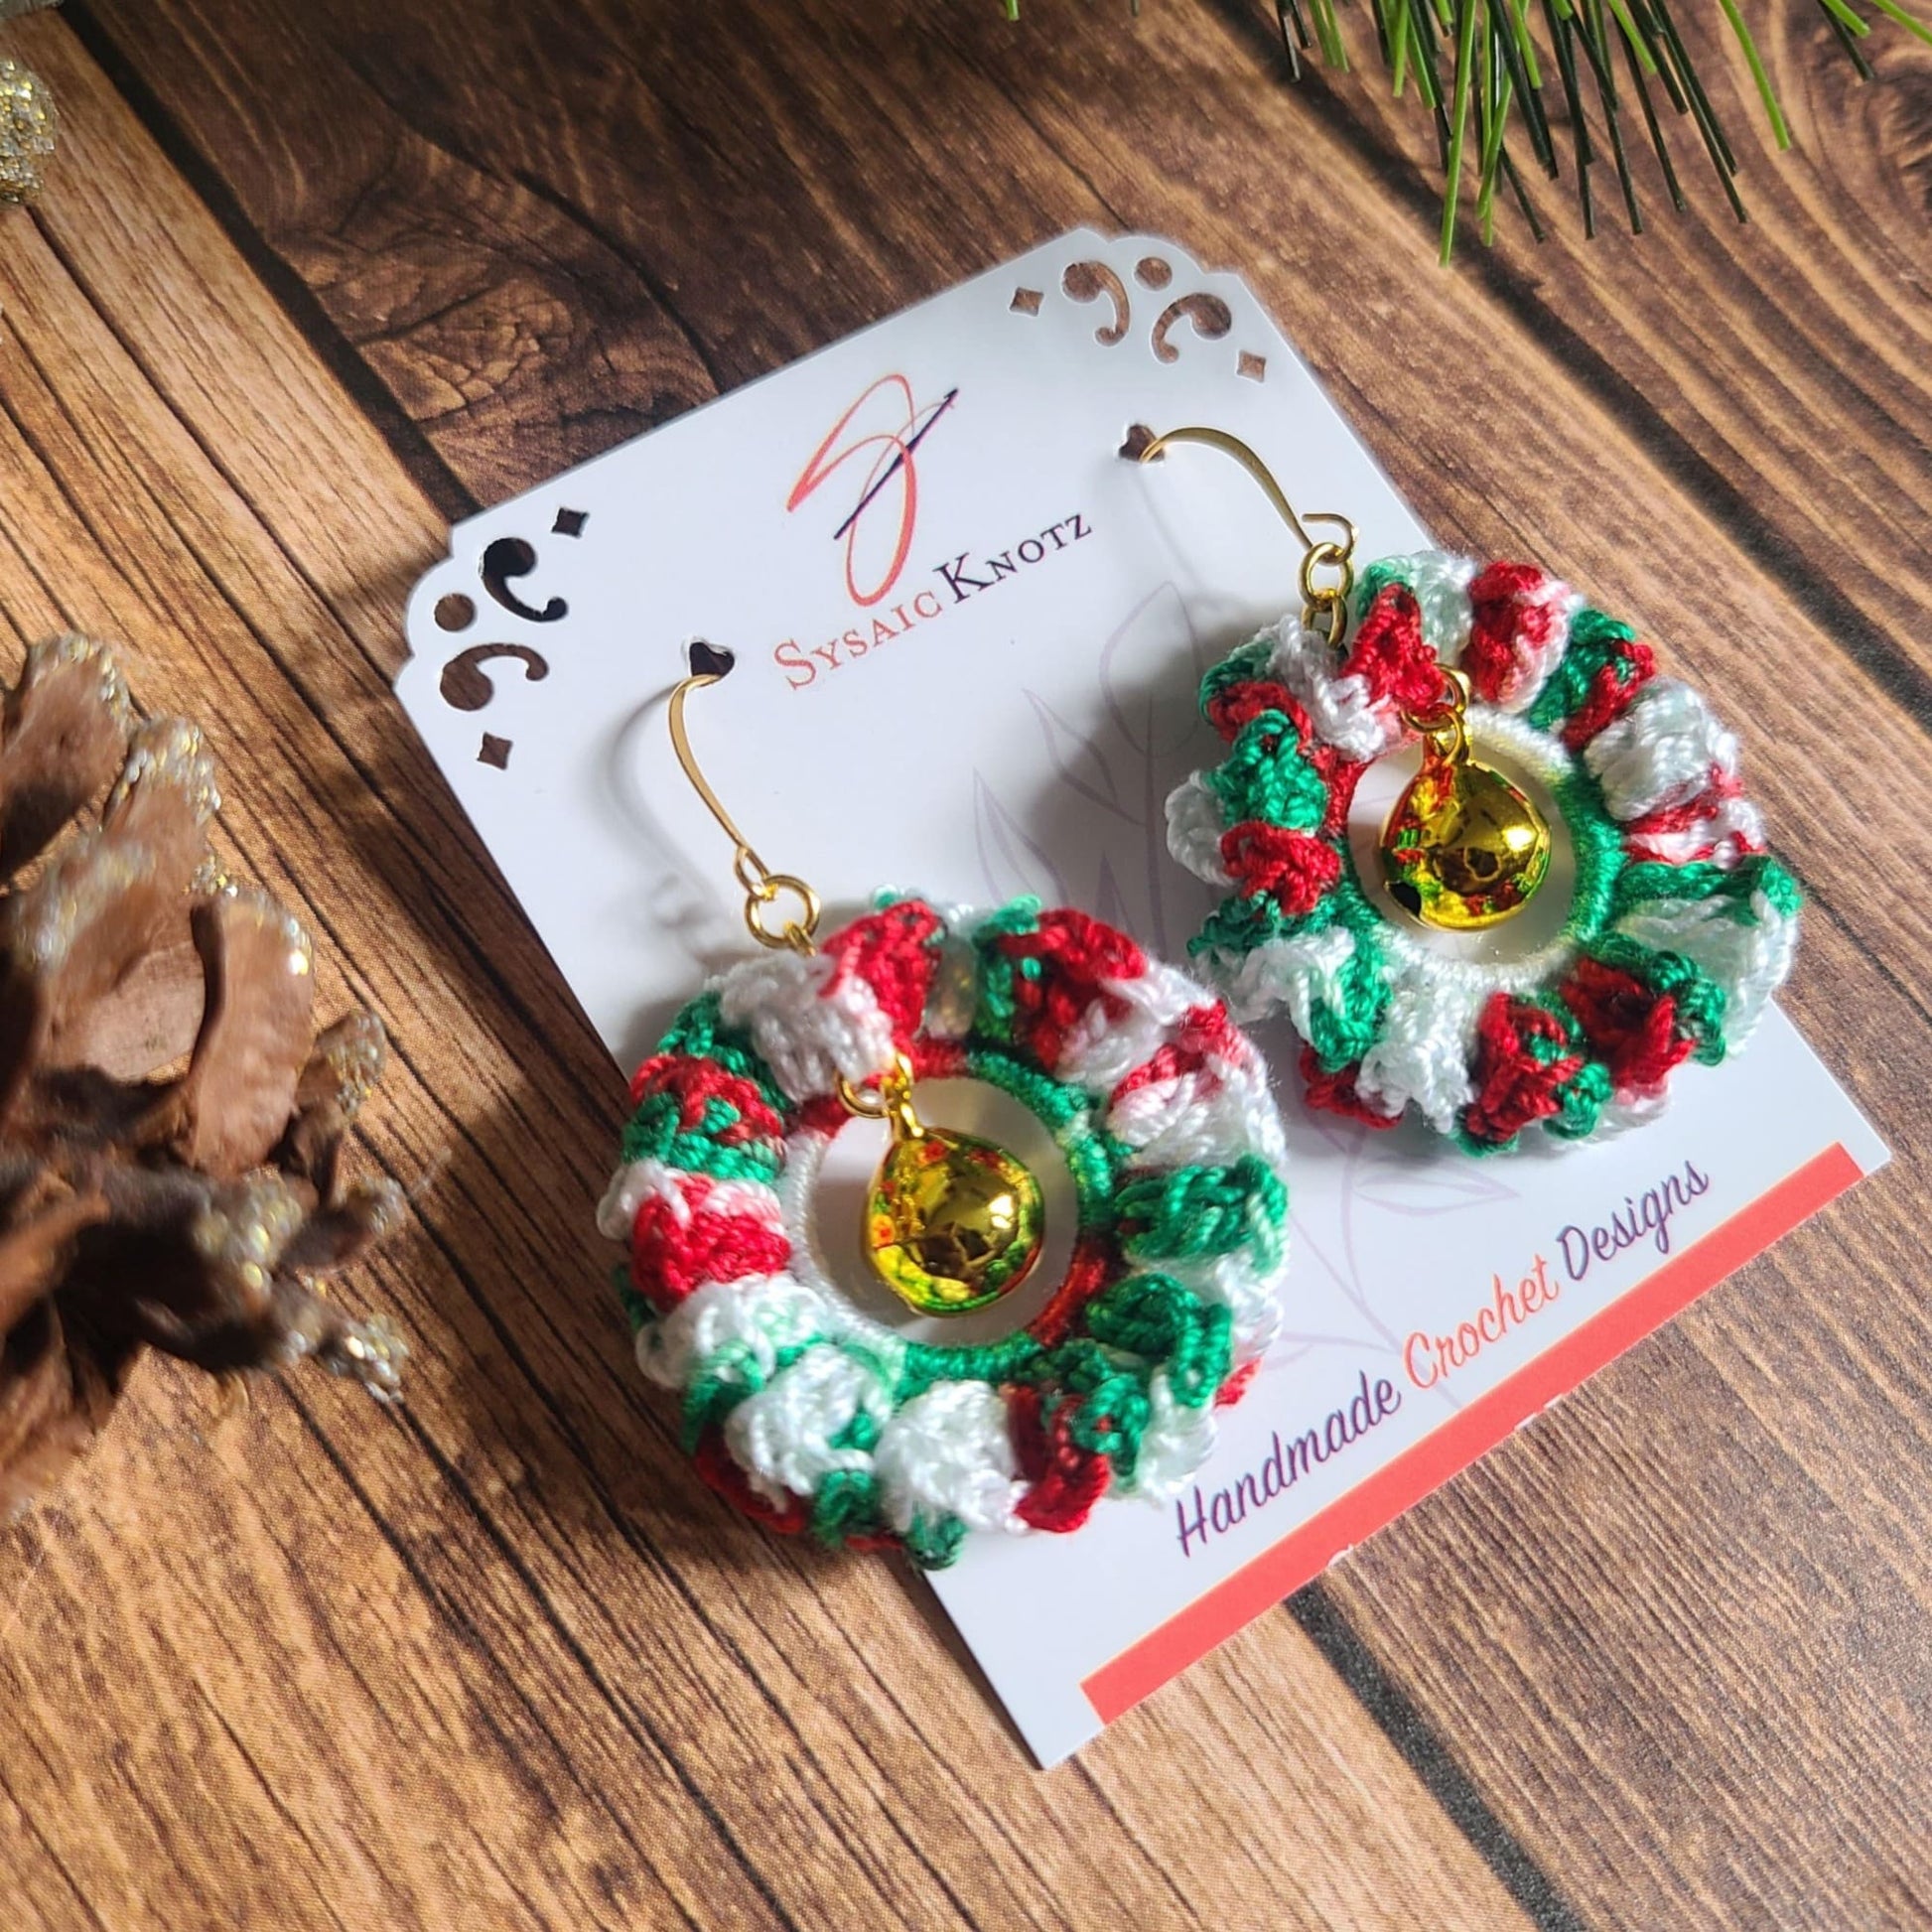 Christmas Wreath earrings on wooden background with pine cone.